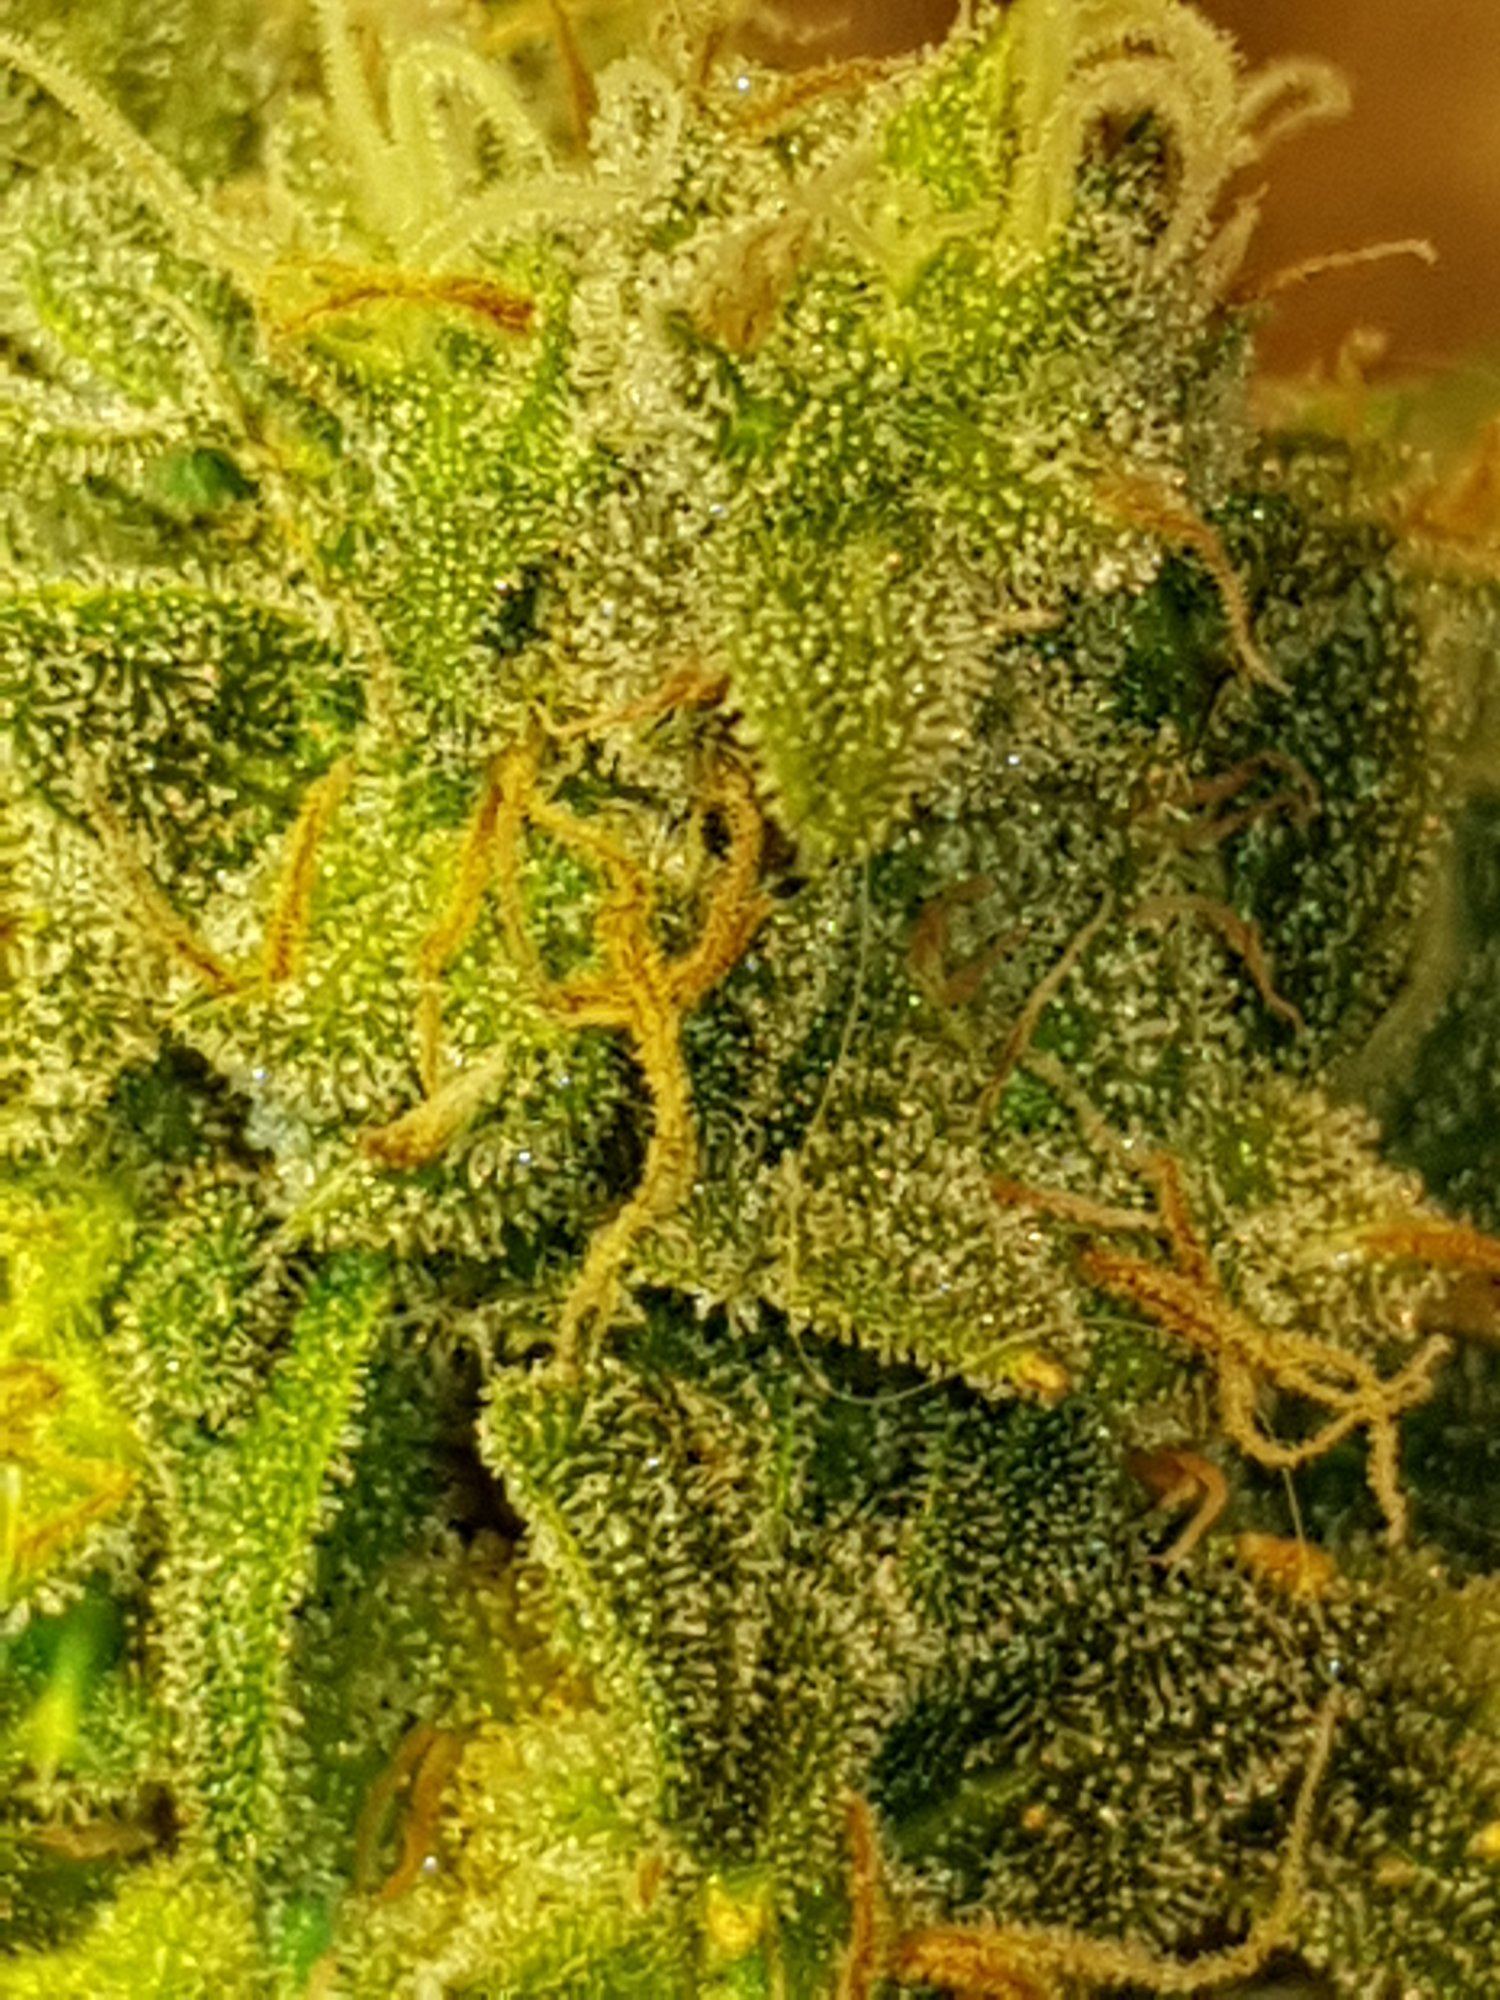 Is it time to harvest pic included 2